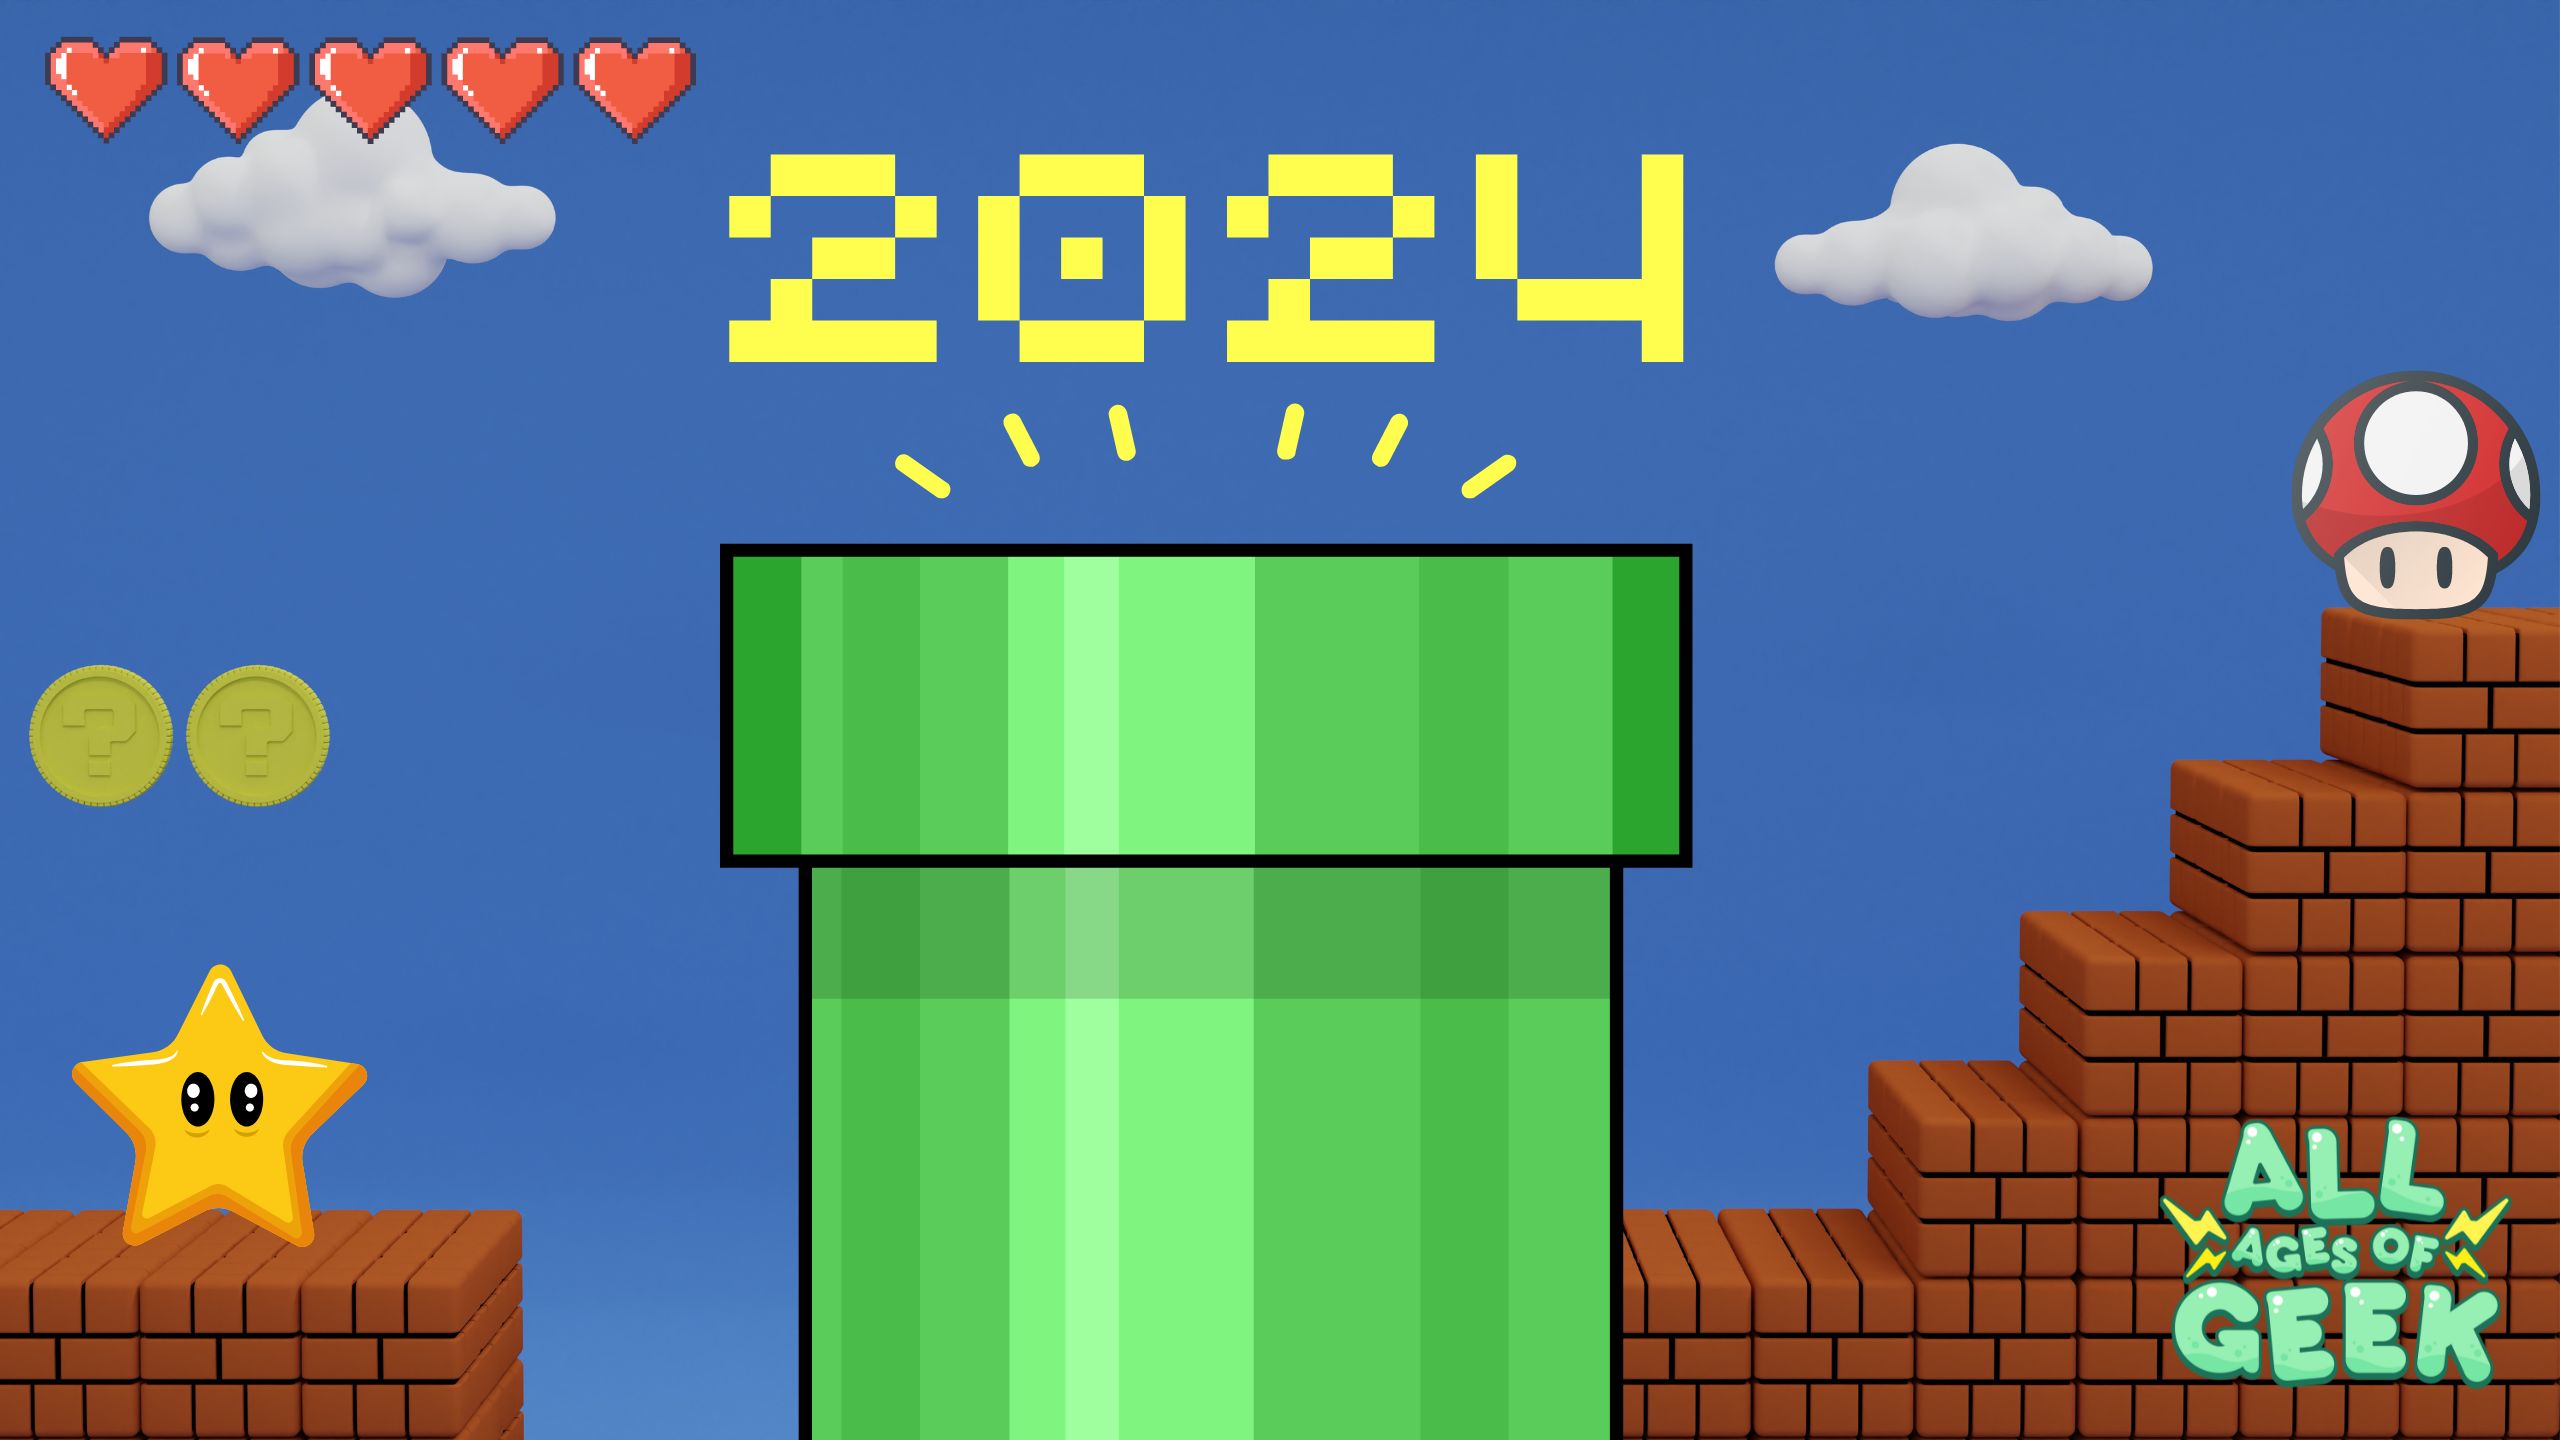 ### Alt Text for Image "An 8-bit style graphic featuring a green warp pipe with the year '2024' above it in yellow pixelated font. Surrounding the pipe are classic video game elements: hearts, coins, a star, a cloud, bricks, and a mushroom. The bottom right corner displays the 'All Ages of Geek' logo."